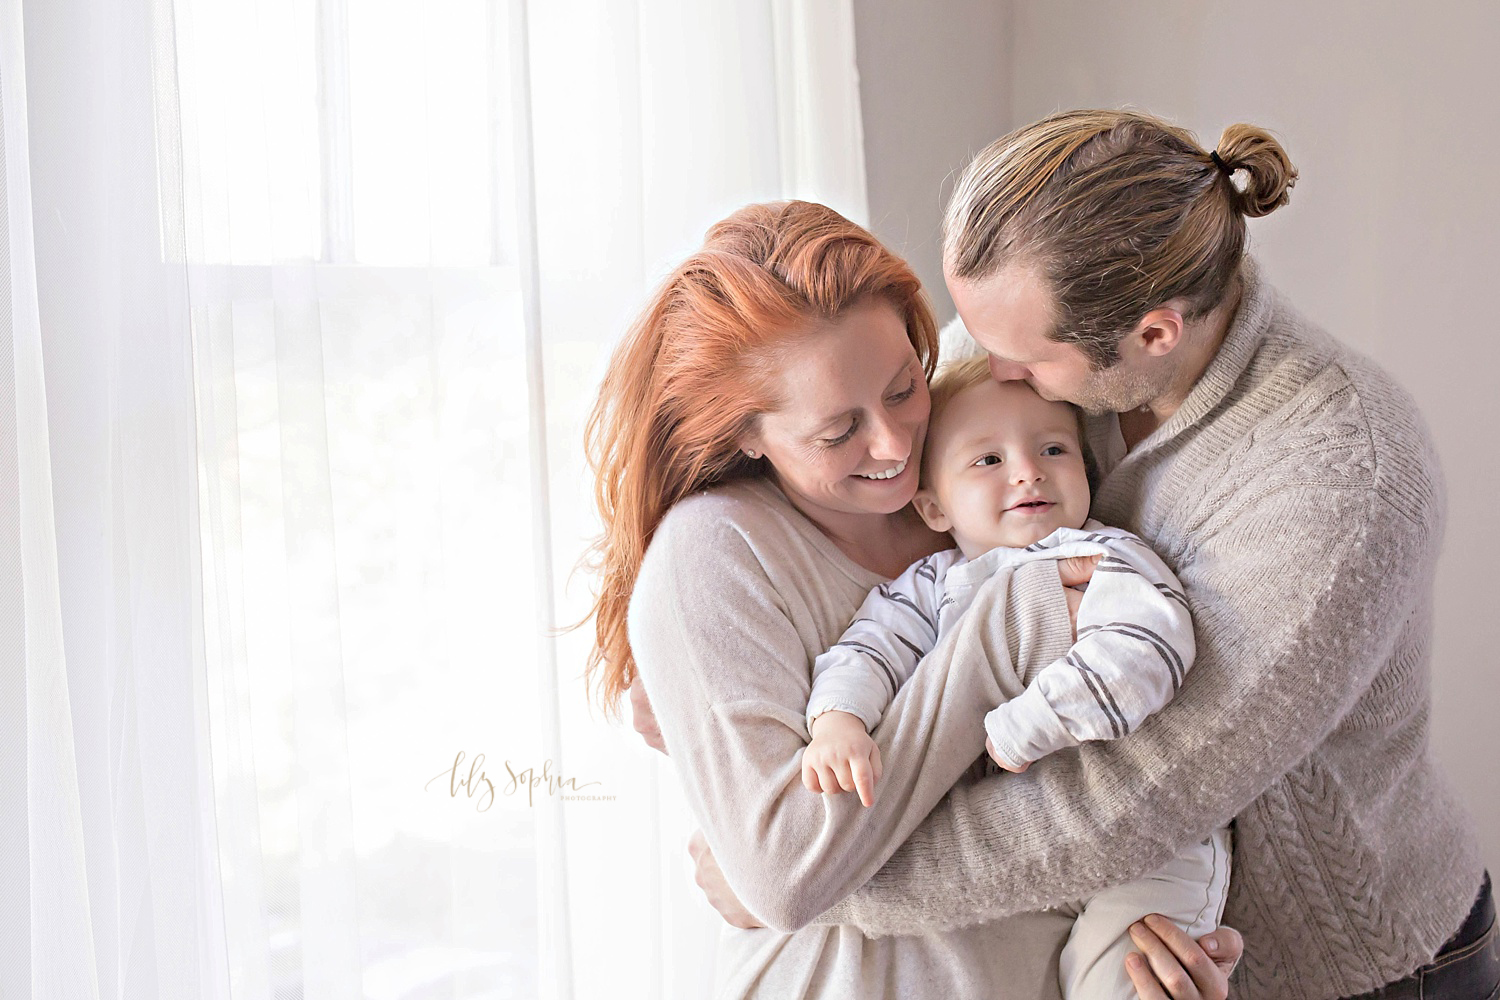  Image of a mother holding her son and smiling down at him, while his father hugs his wife and kisses his son's forehead.&nbsp; 